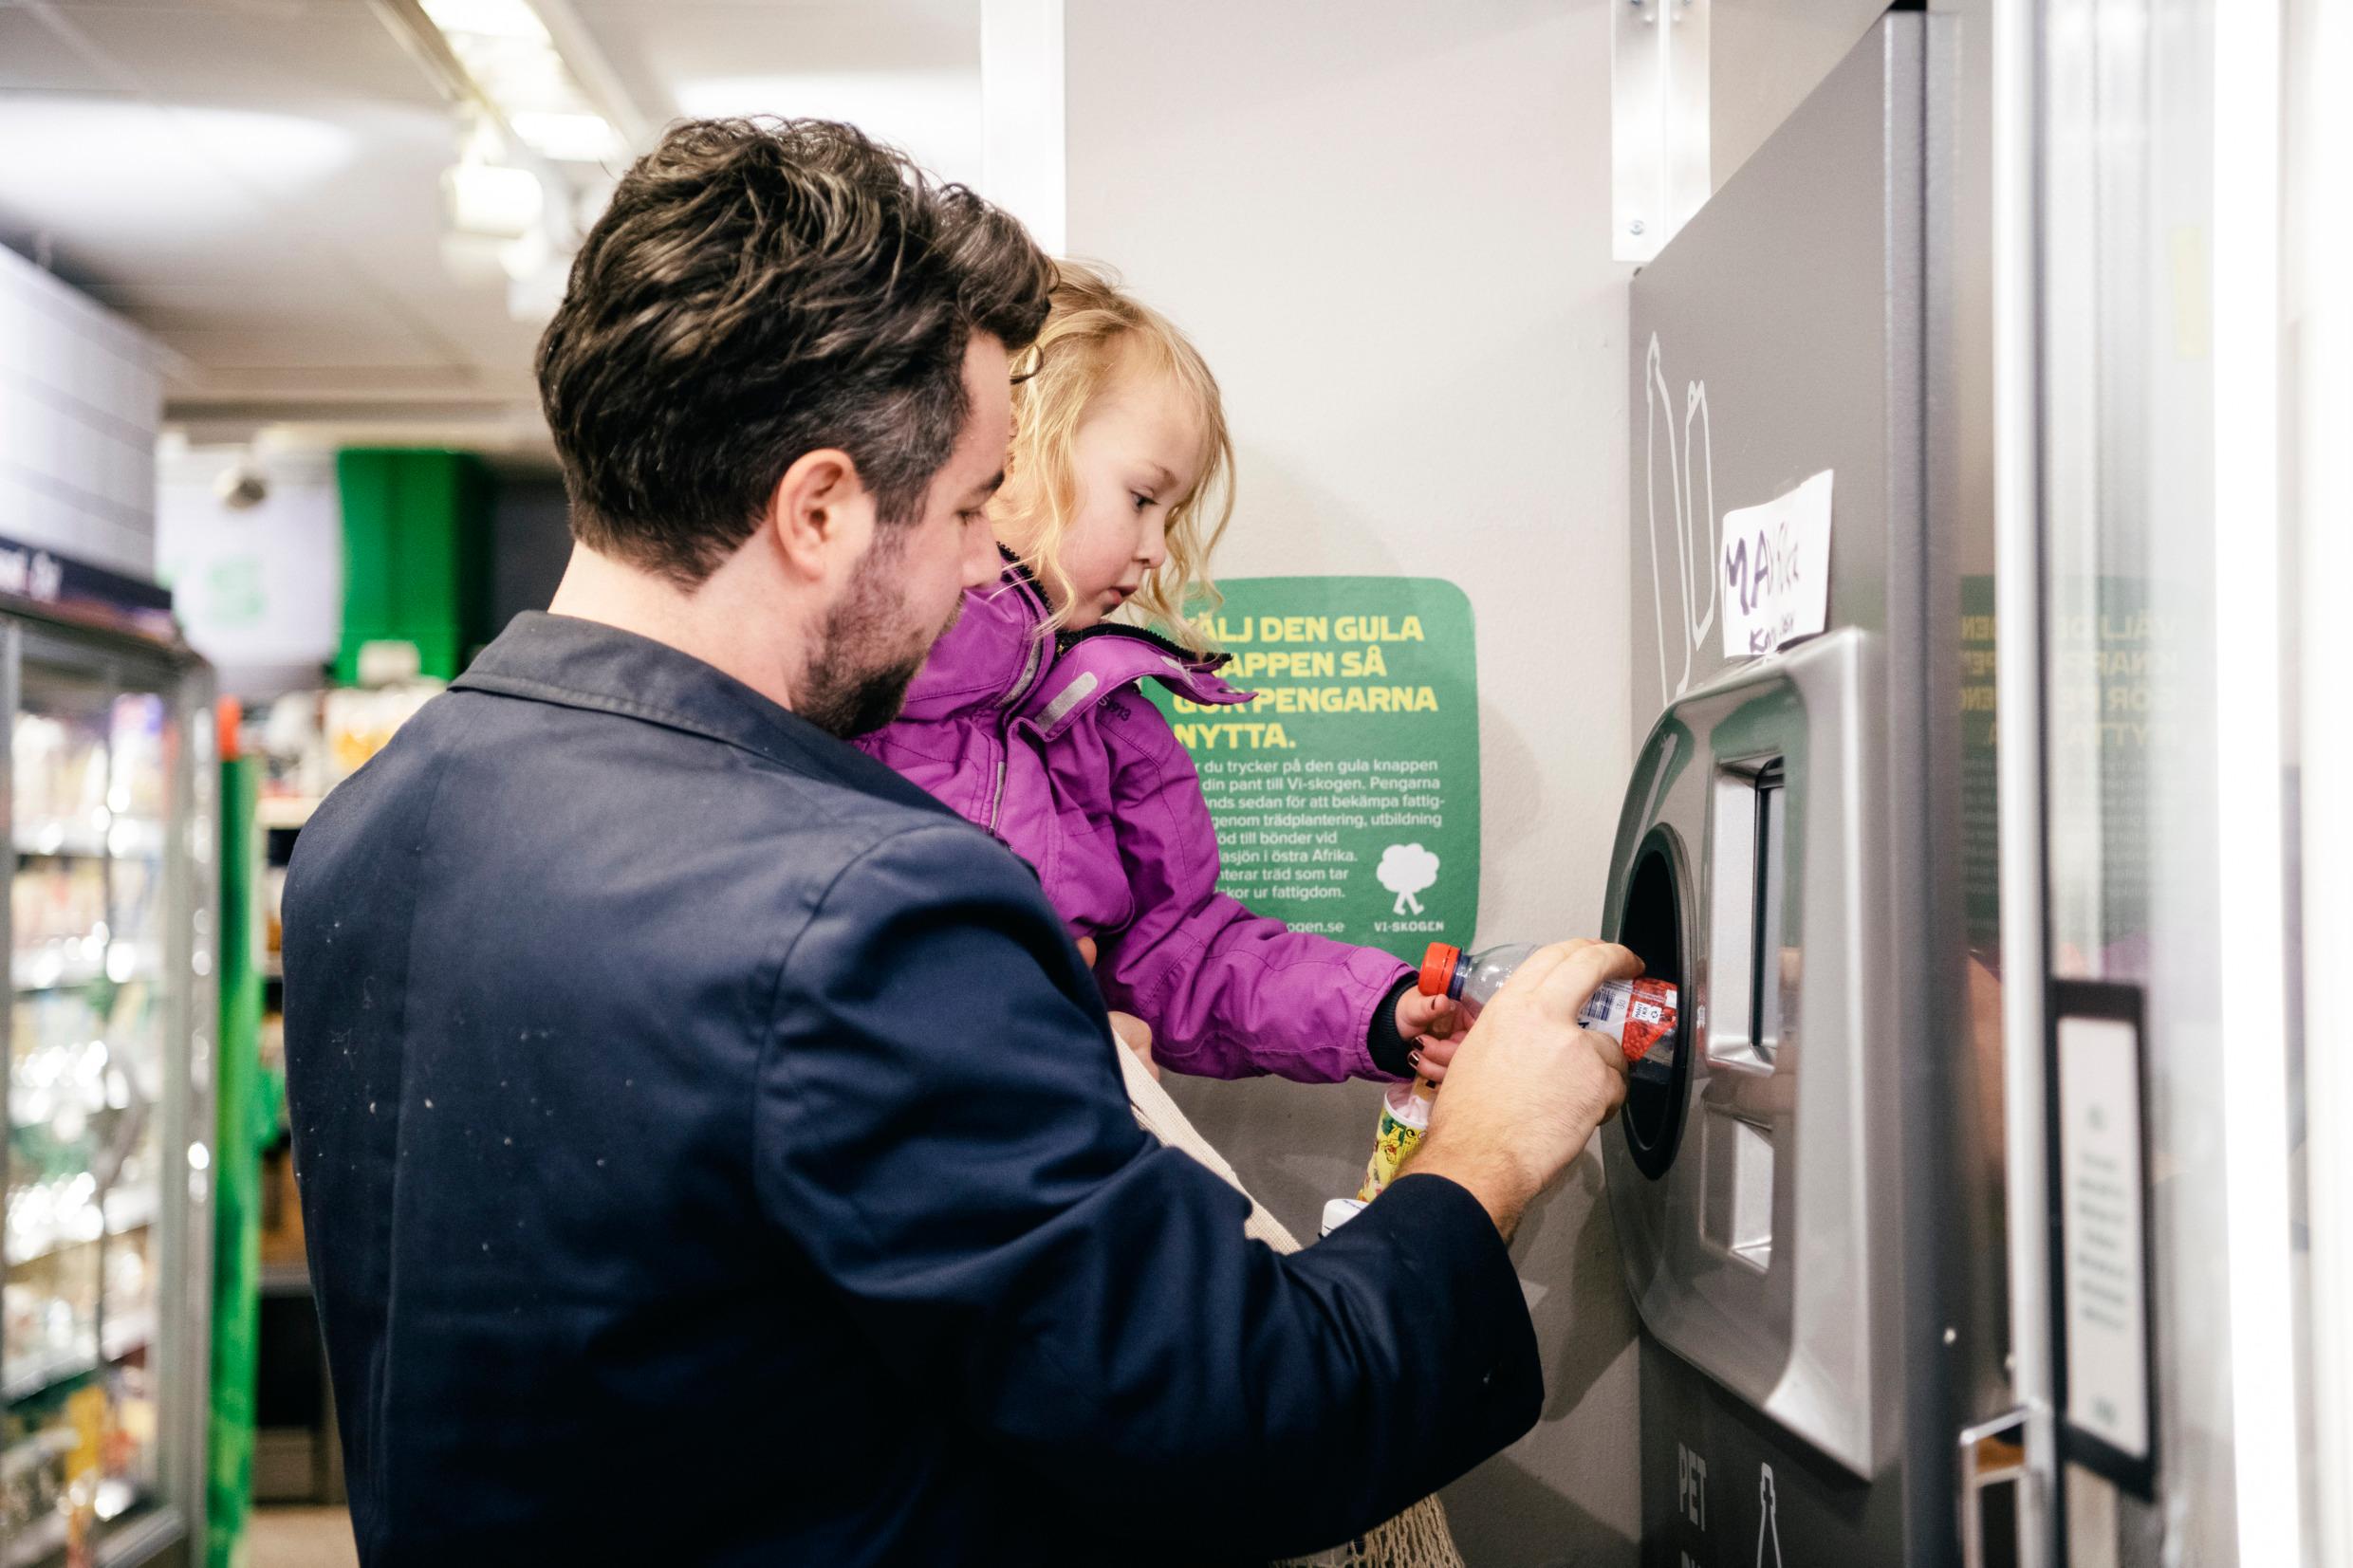 A man is holding a small child. Together they push a plastic bottle into a machine,